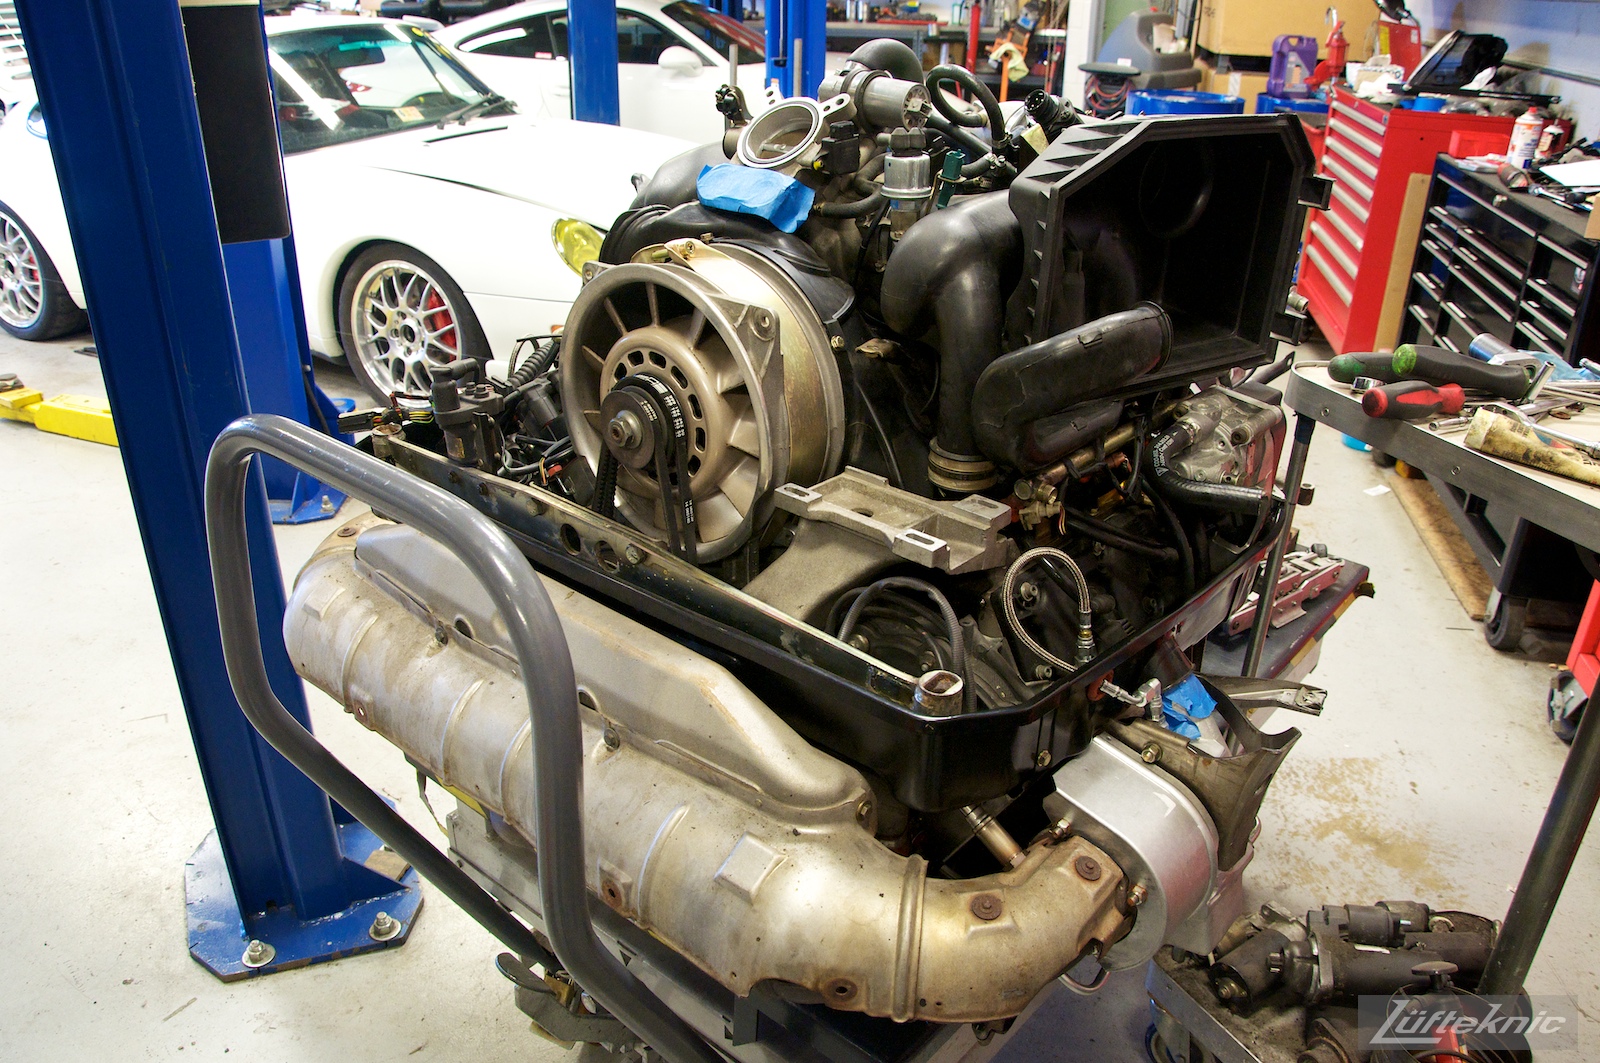 993 Turbo motor freshly rebuilt with hybrid turbos, waiting to be installed.